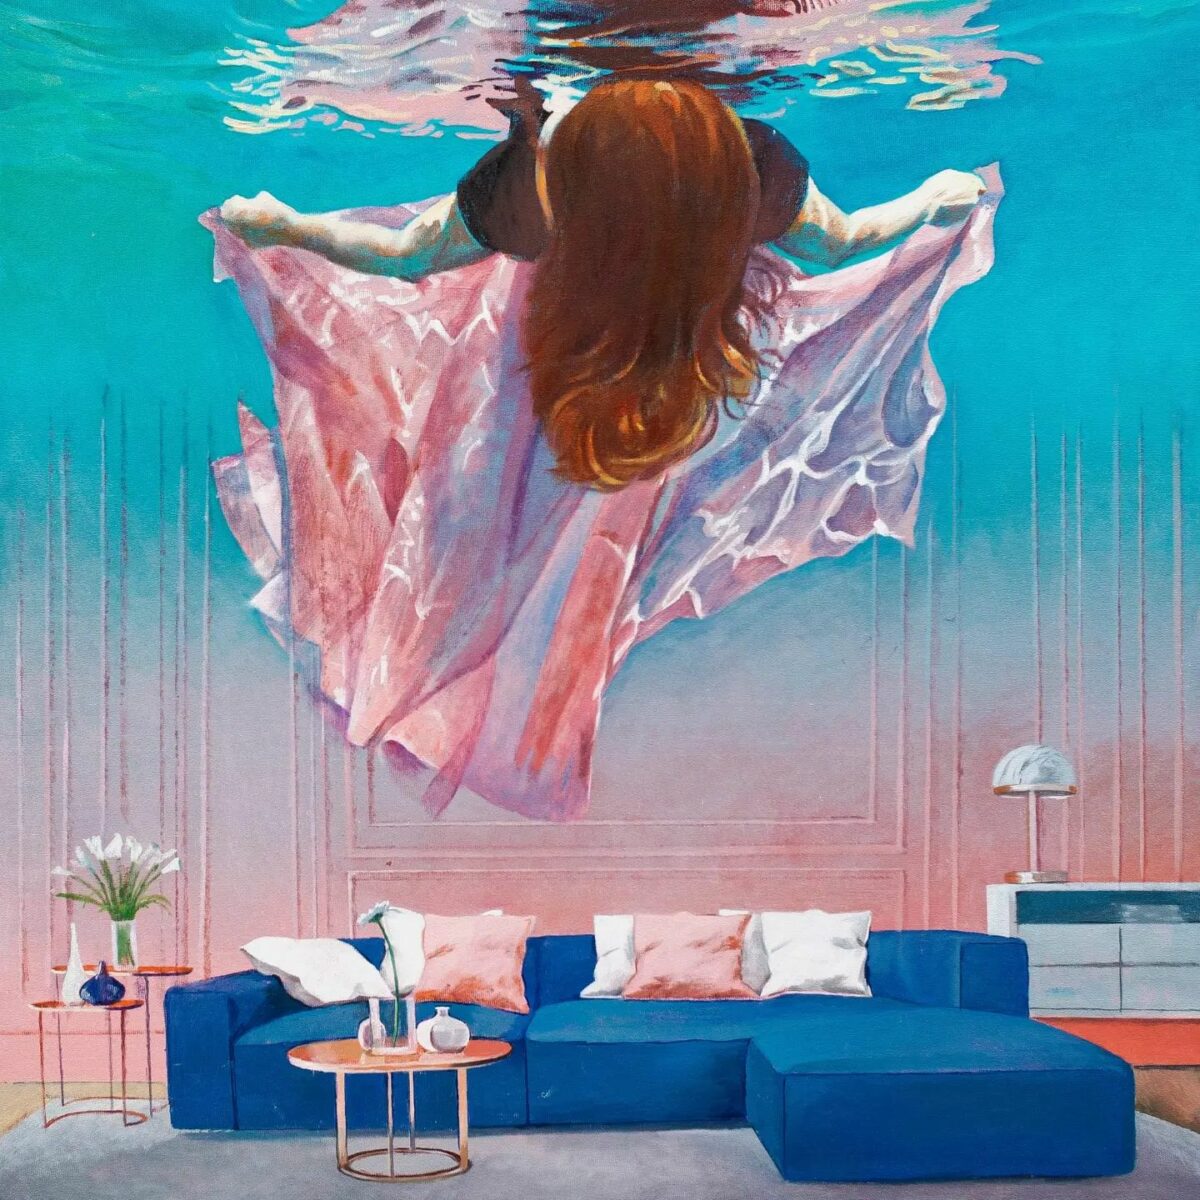 Dream Of Freedom Breathtaking Surrealistic Paintings Of Figures Floating In Flooded Rooms By Ivana Zivic 5